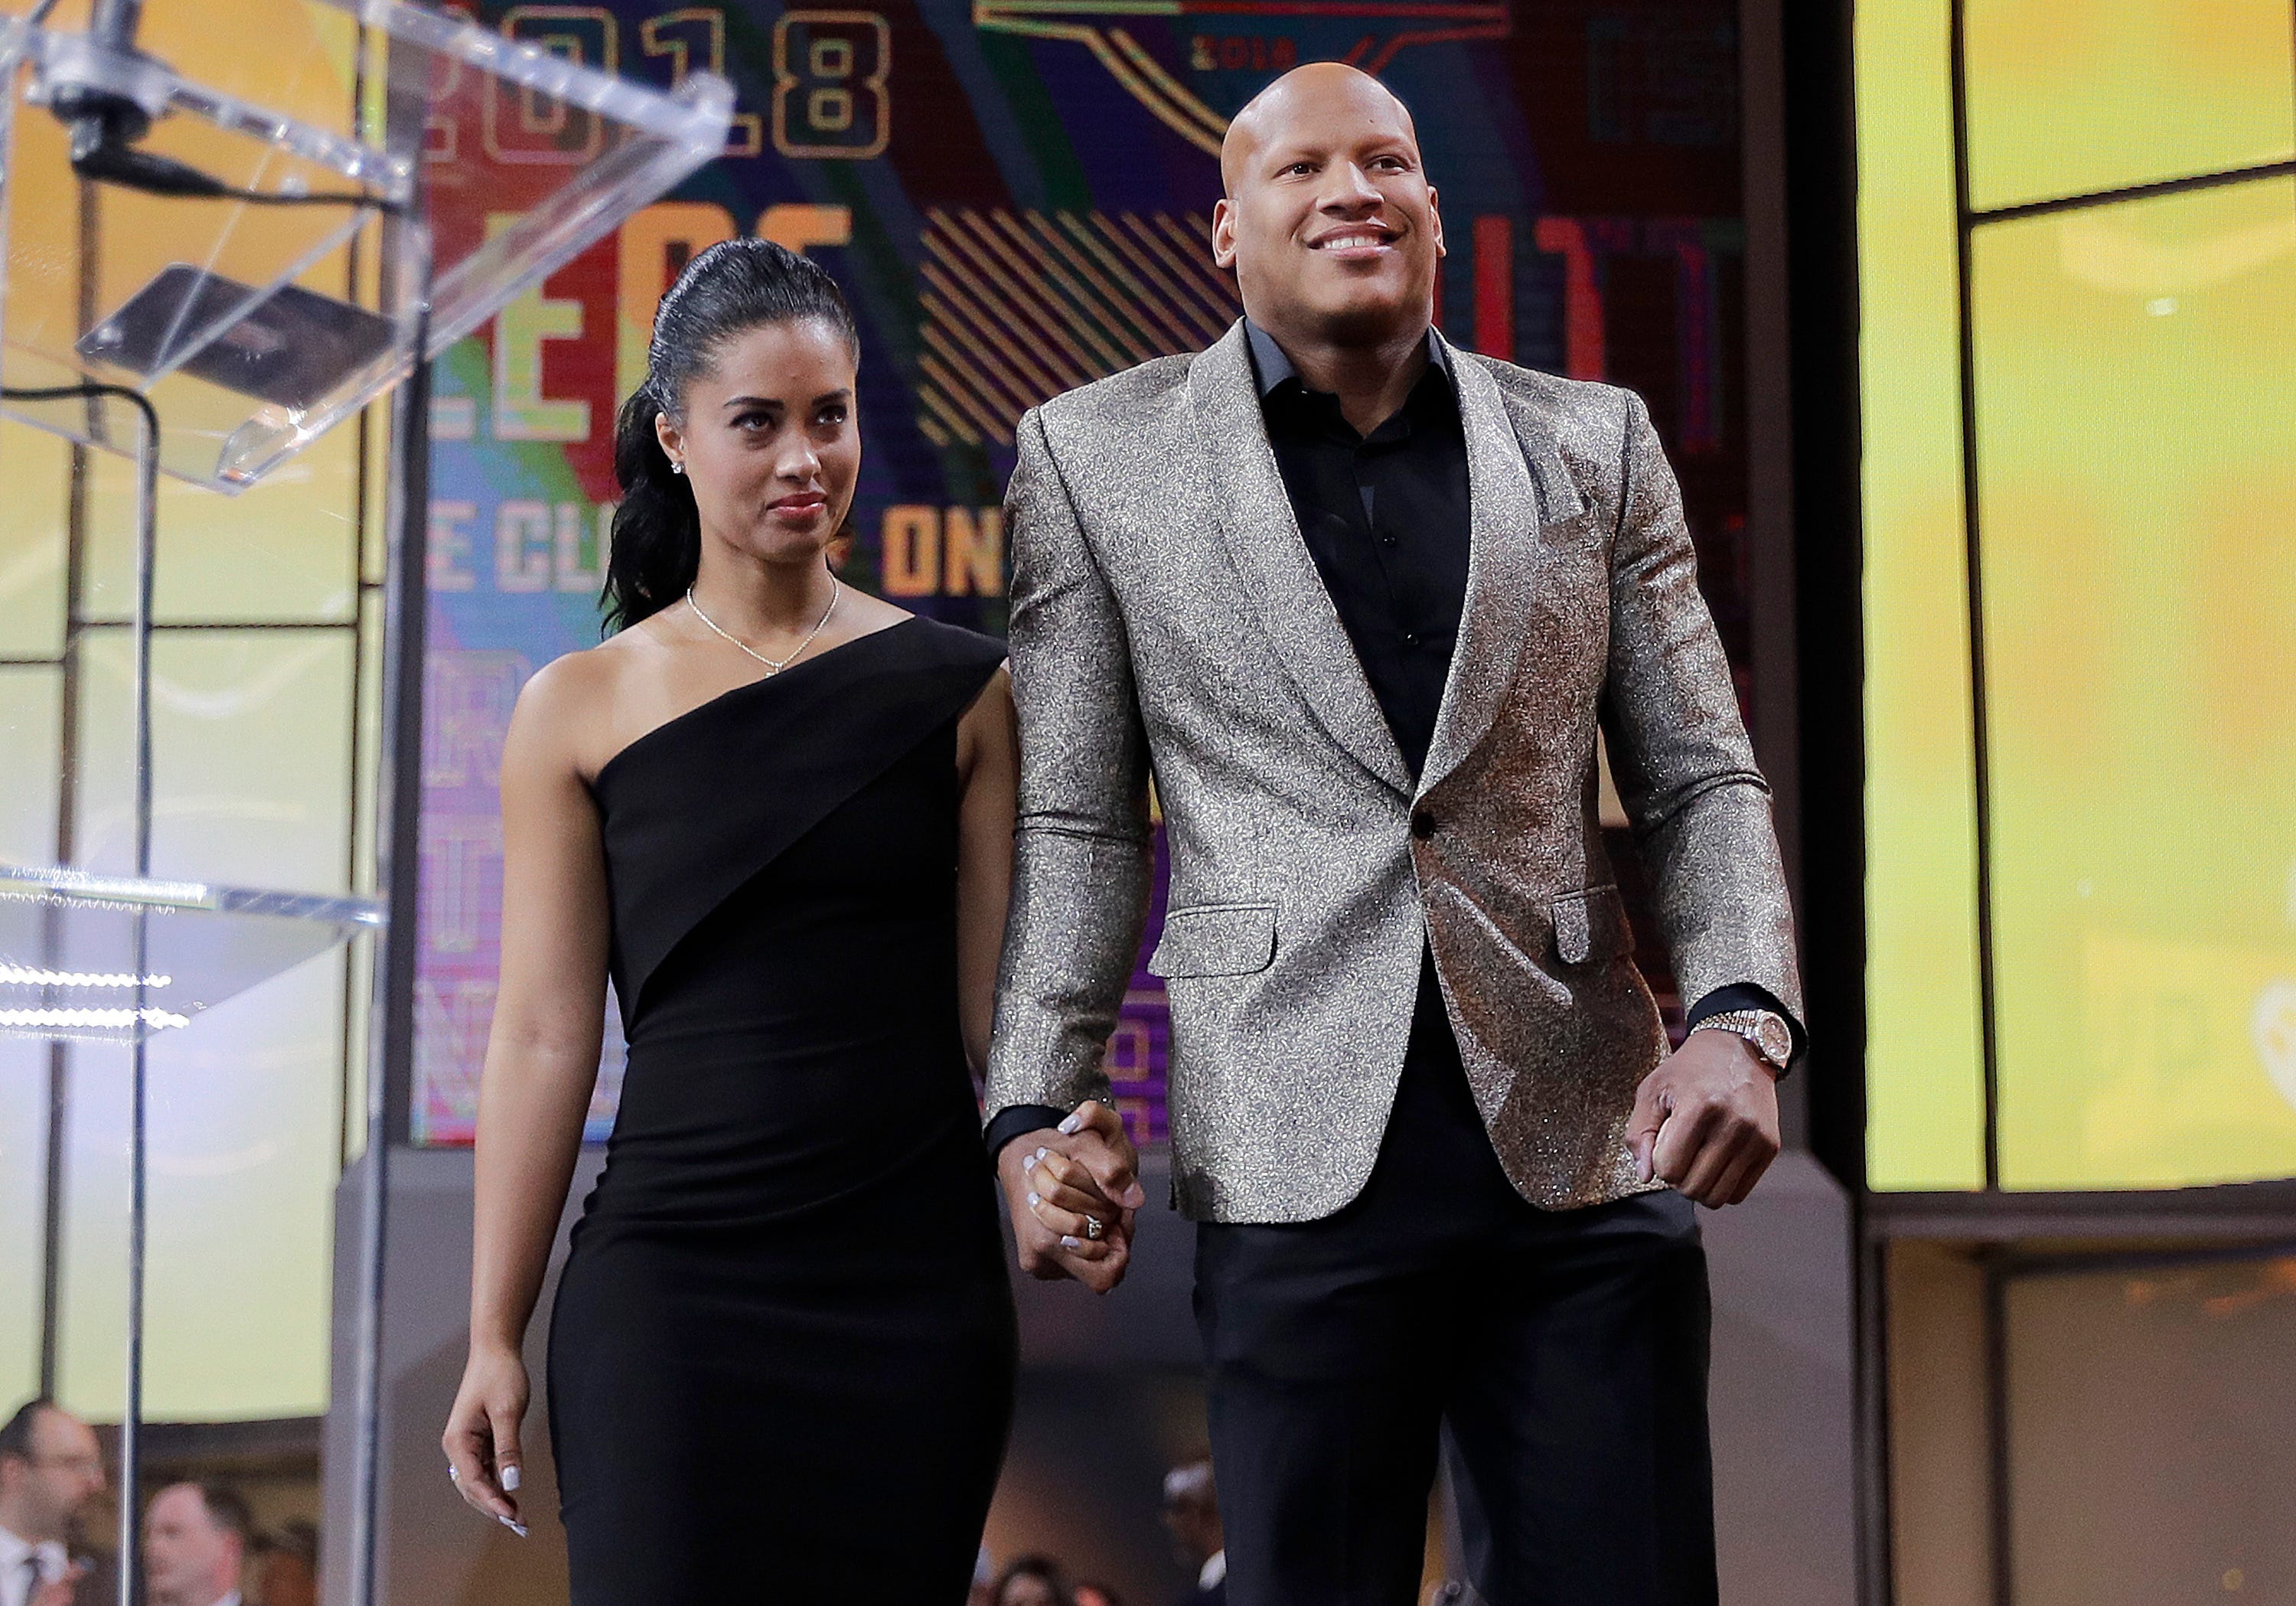 Steelers' Ryan Shazier dances at his wedding, 18 months after spinal injury